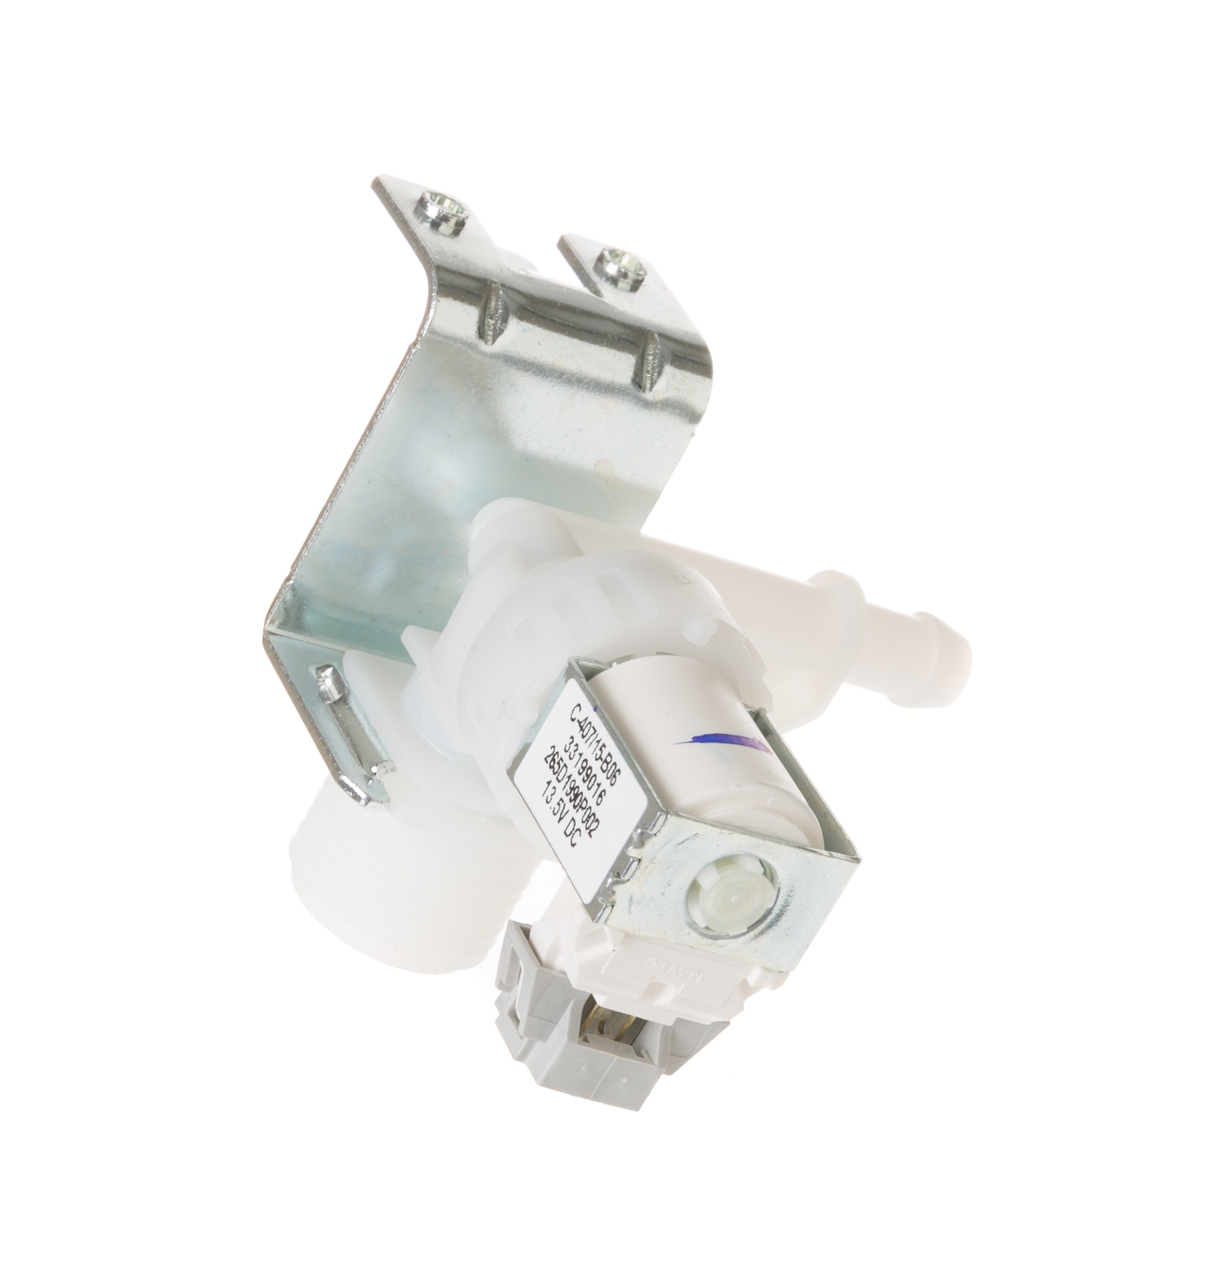 GE Dishwasher Water Valve Assembly. Part #WG04F09928